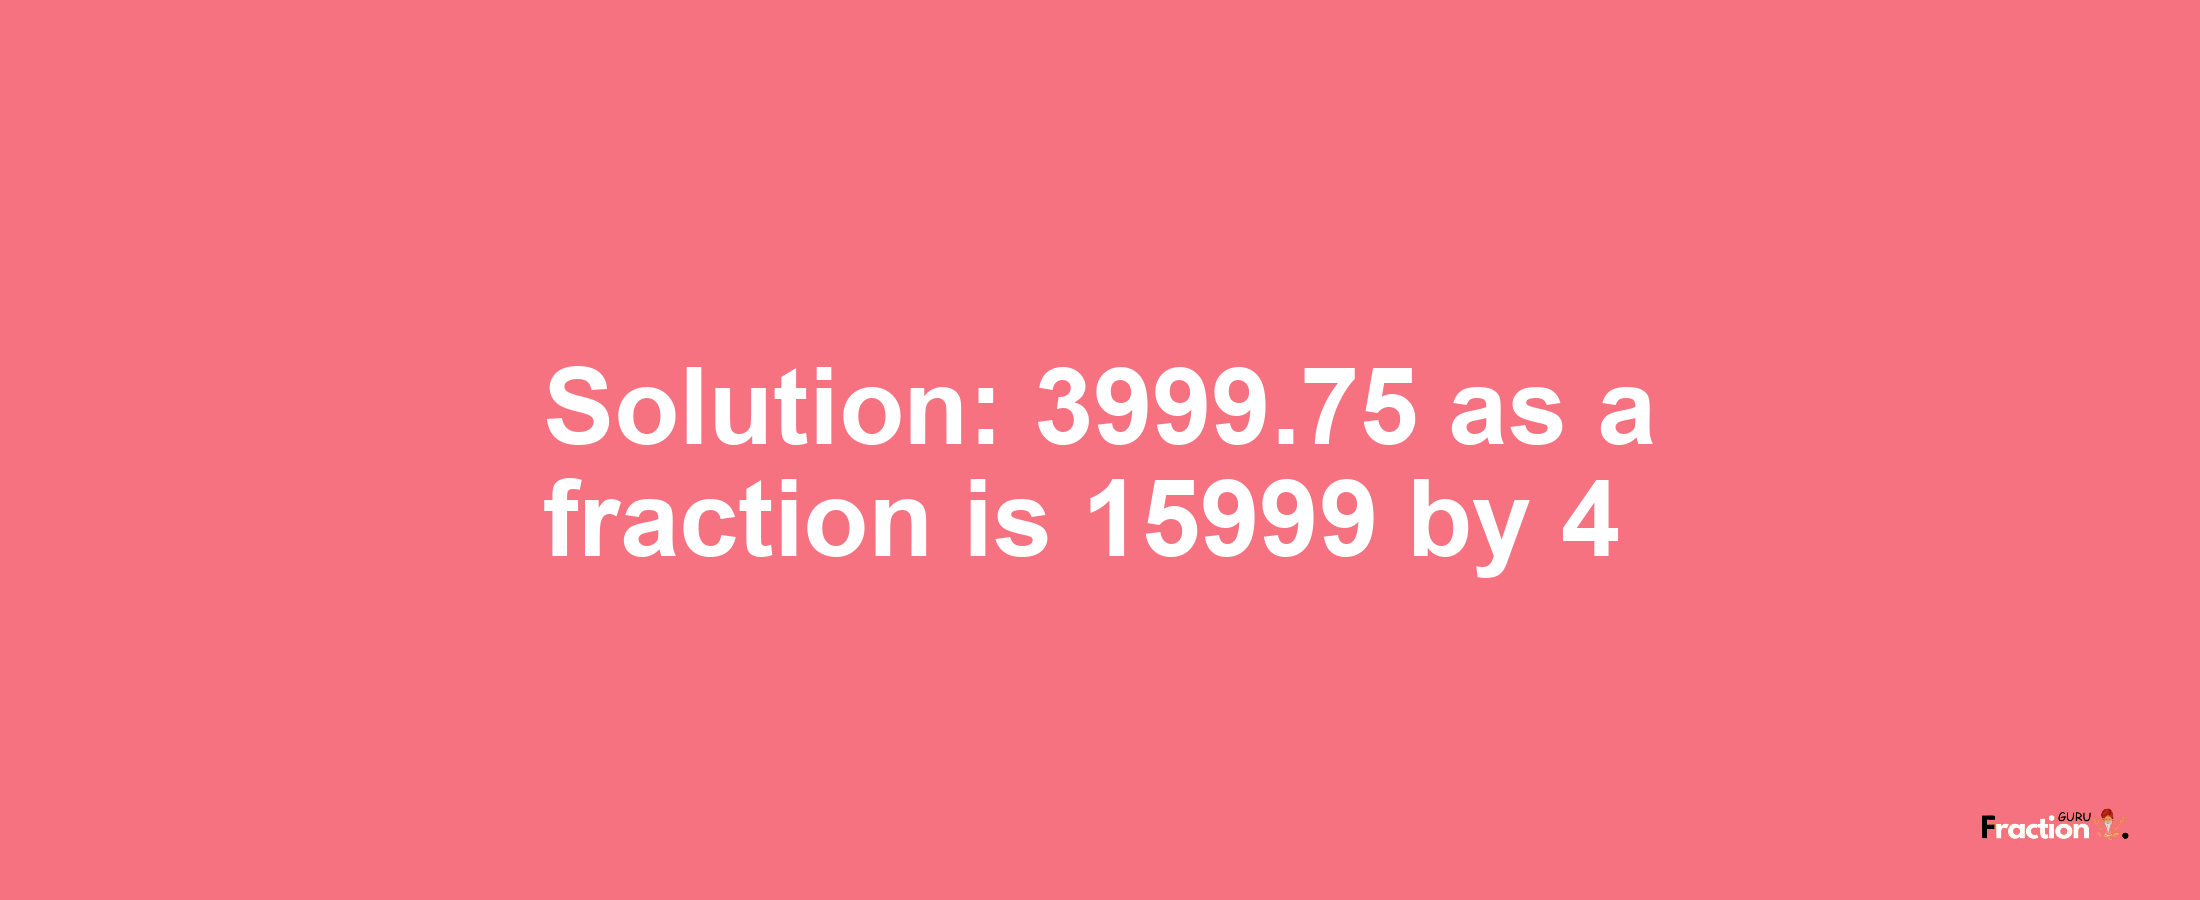 Solution:3999.75 as a fraction is 15999/4